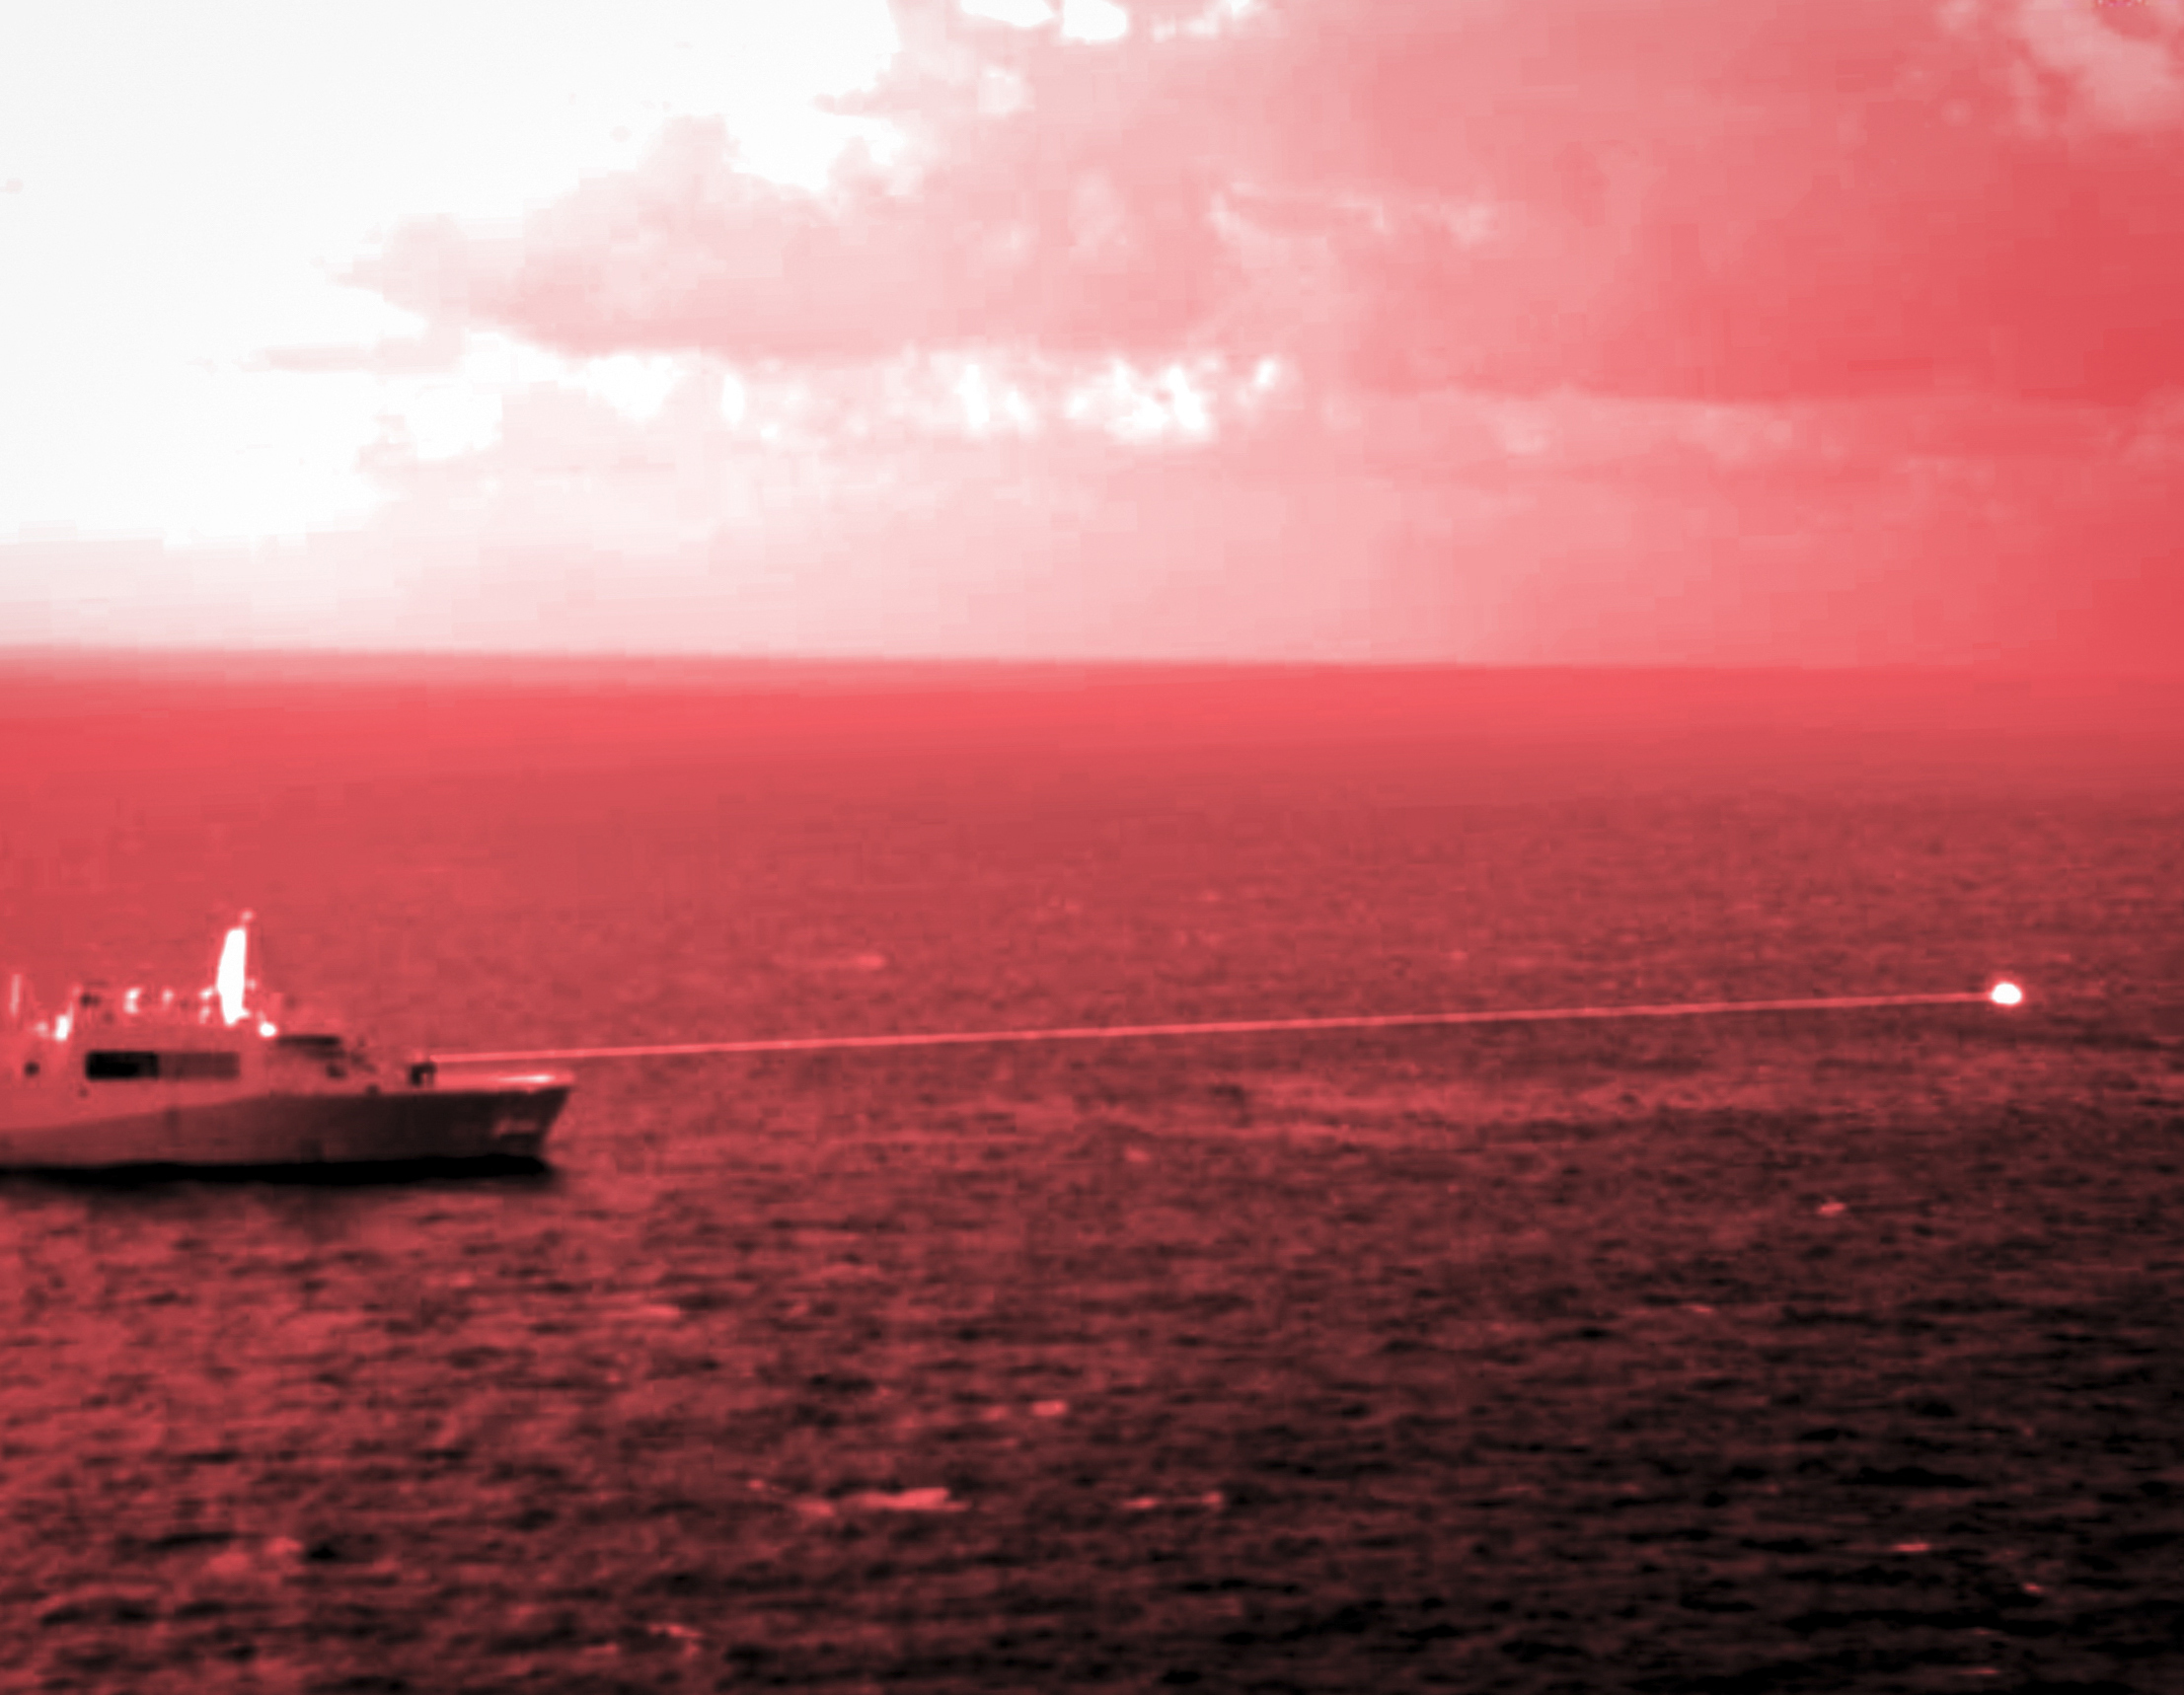 In this handout infrared photo from the U.S. Marine Corps, the USS Portland fires a laser weapon system at a target floating in the Gulf of Aden on Tuesday. The U.S. Navy announced Wednesday that it tested a laser weapon and destroyed a floating target in the Middle East.